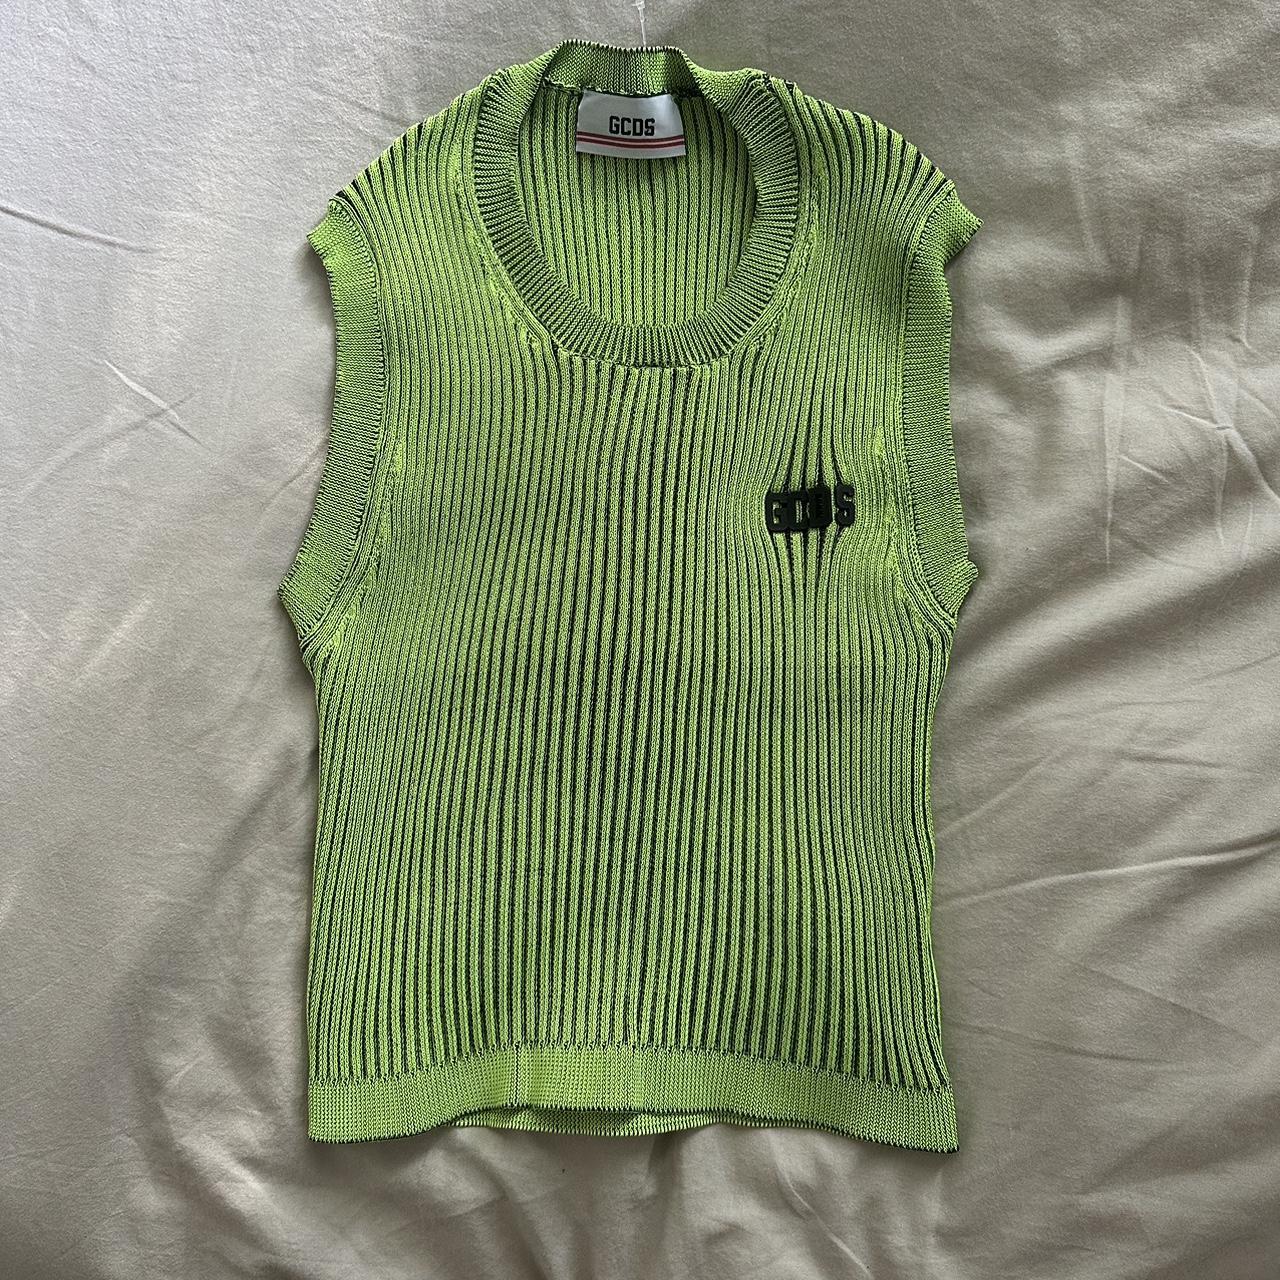 GCDS authentic knit top green top brand new never... - Depop